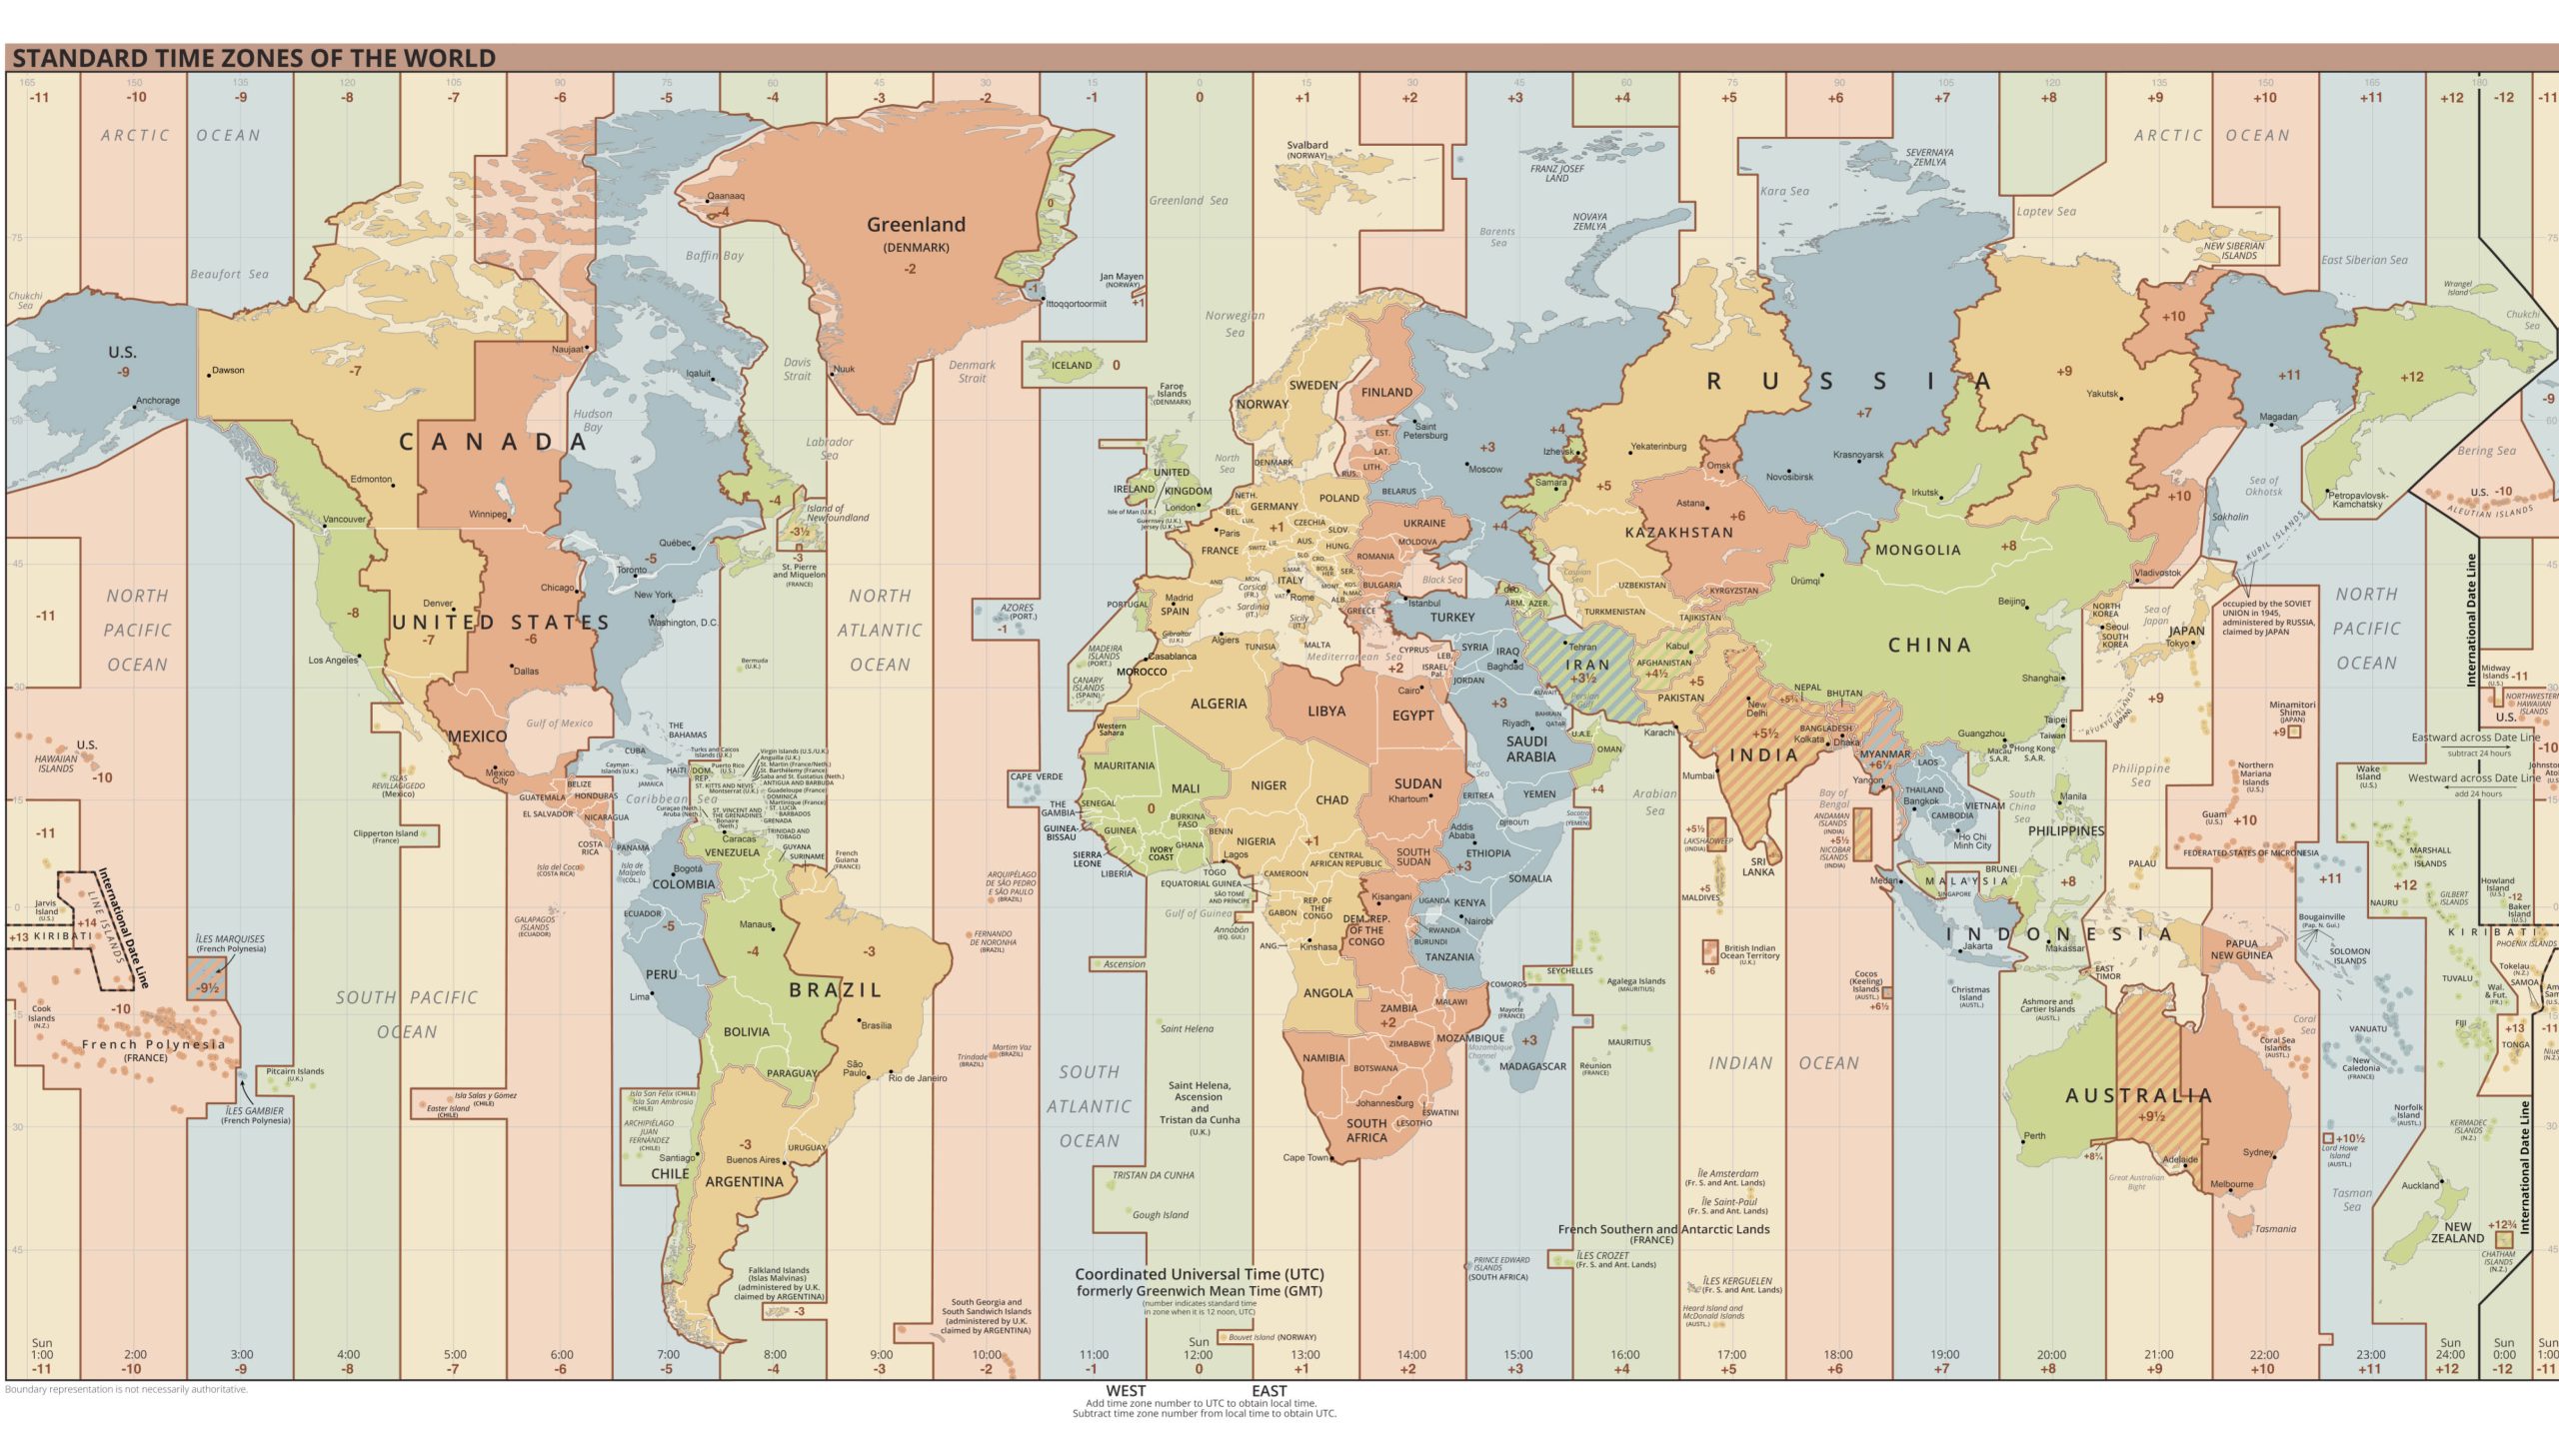 World Time Zones Map scaled